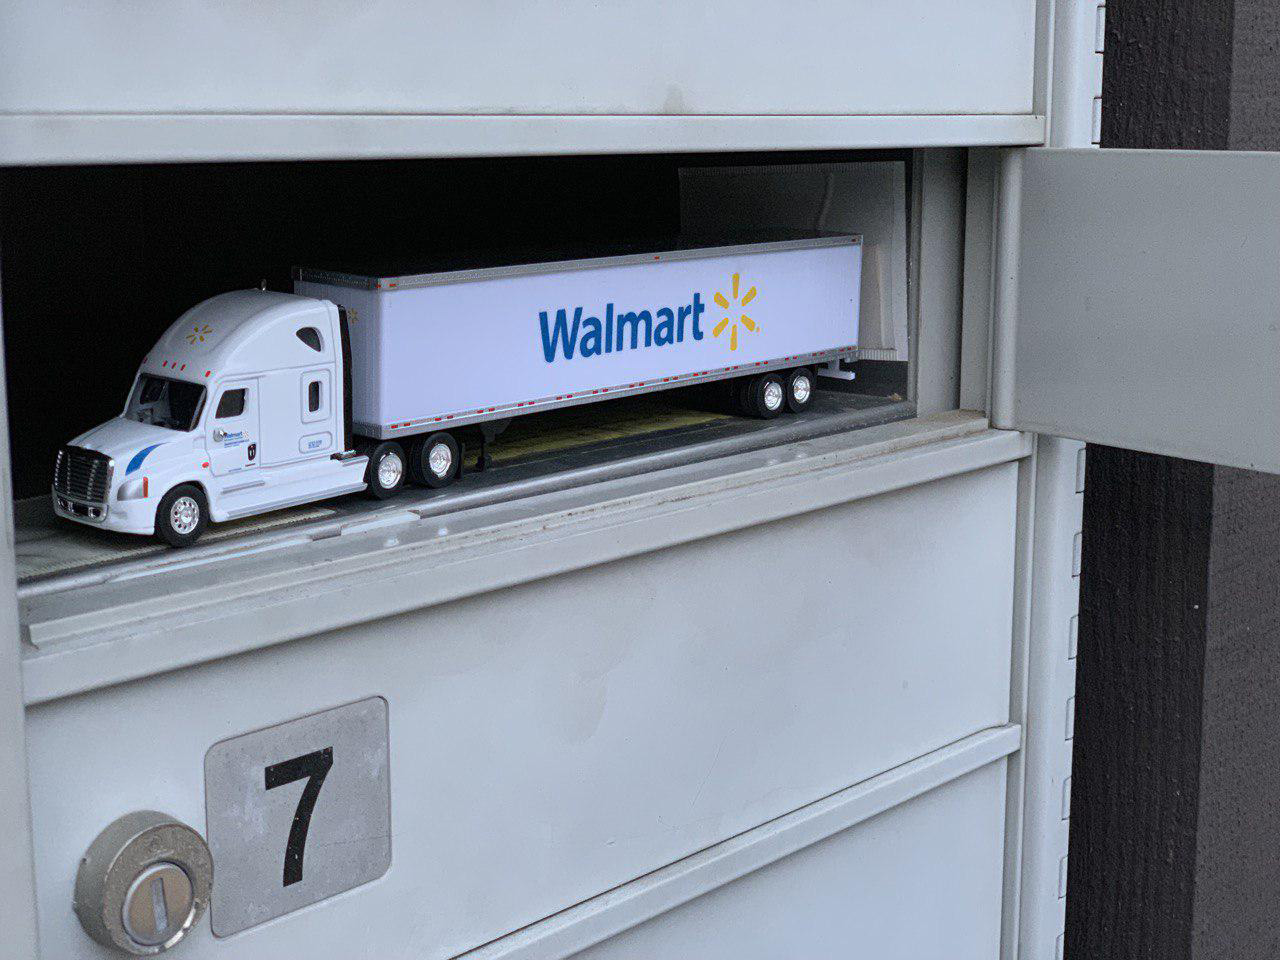 Walmart Beats Amazon with Free Next Day Delivery